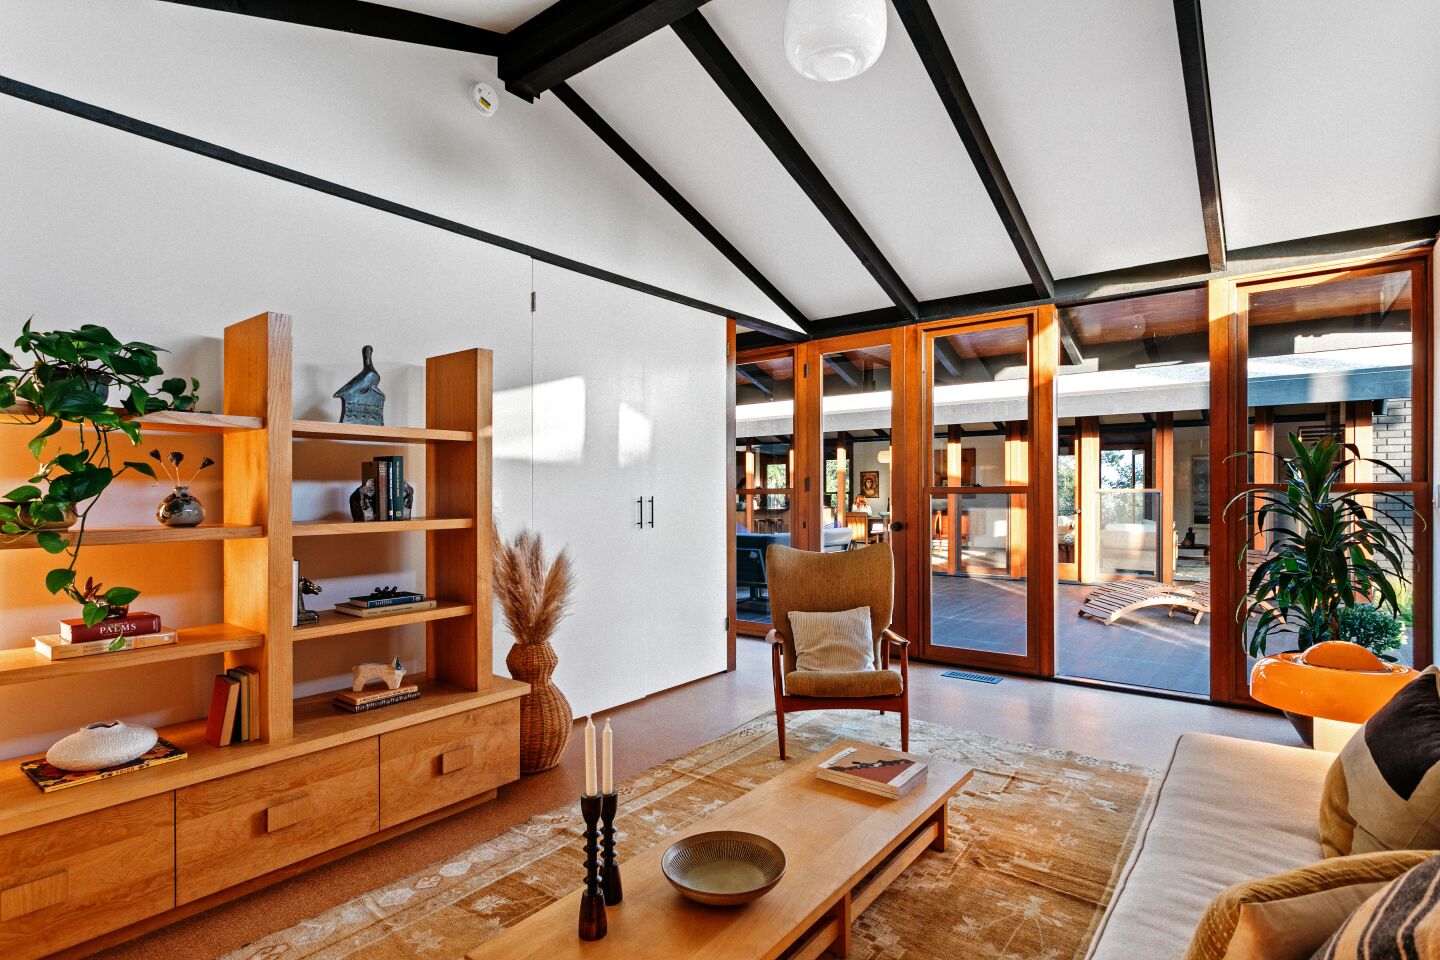 The post-and-beam residence features vaulted ceilings.